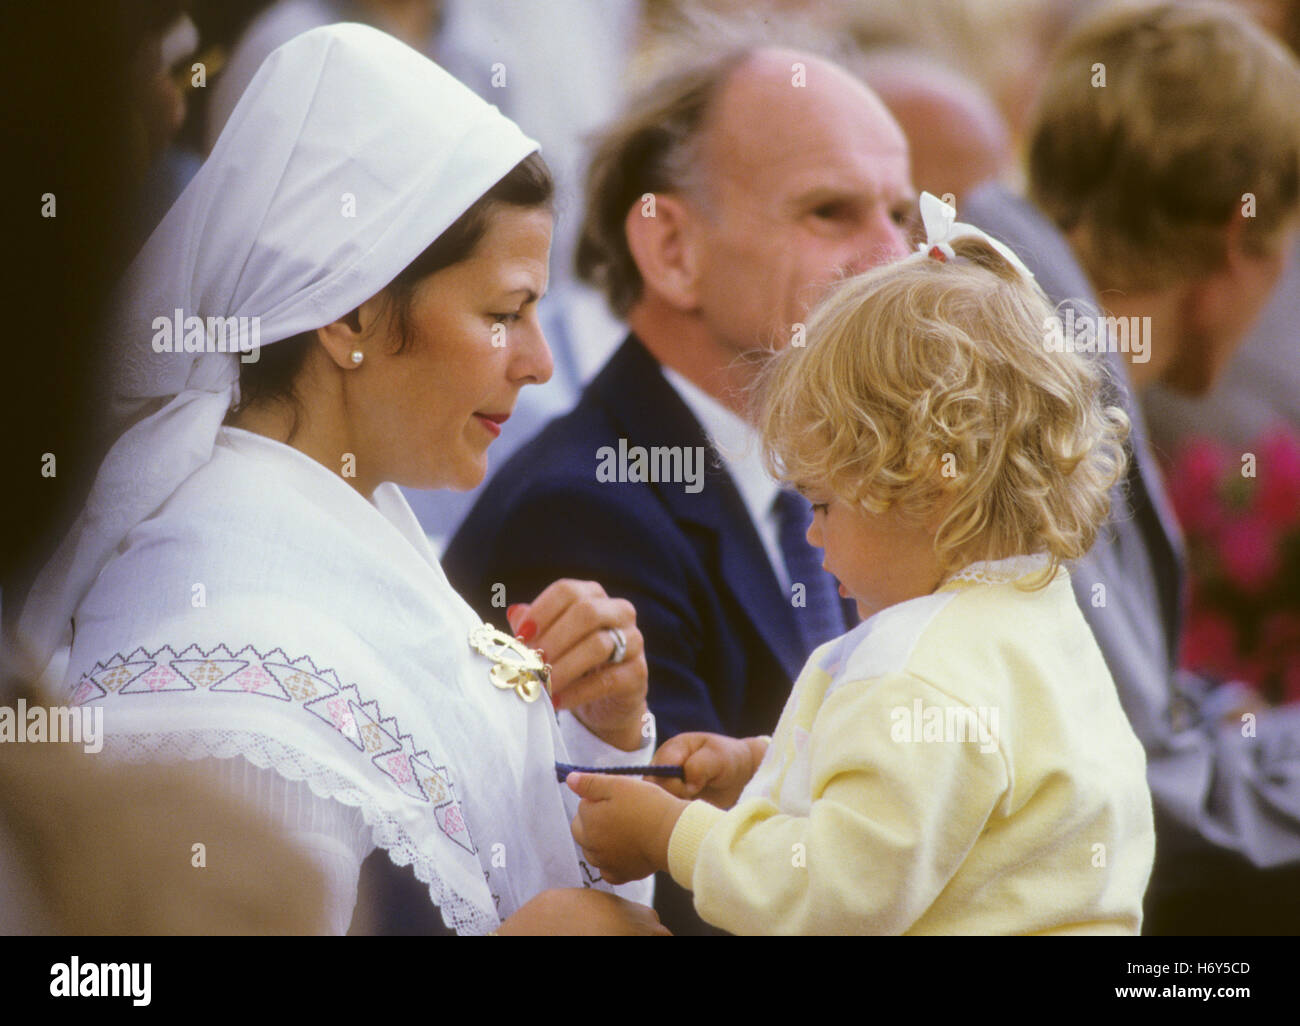 queen-silvia-in-costume-with-princess-madeleine-to-celebrate-crown-H6Y5CD.jpg